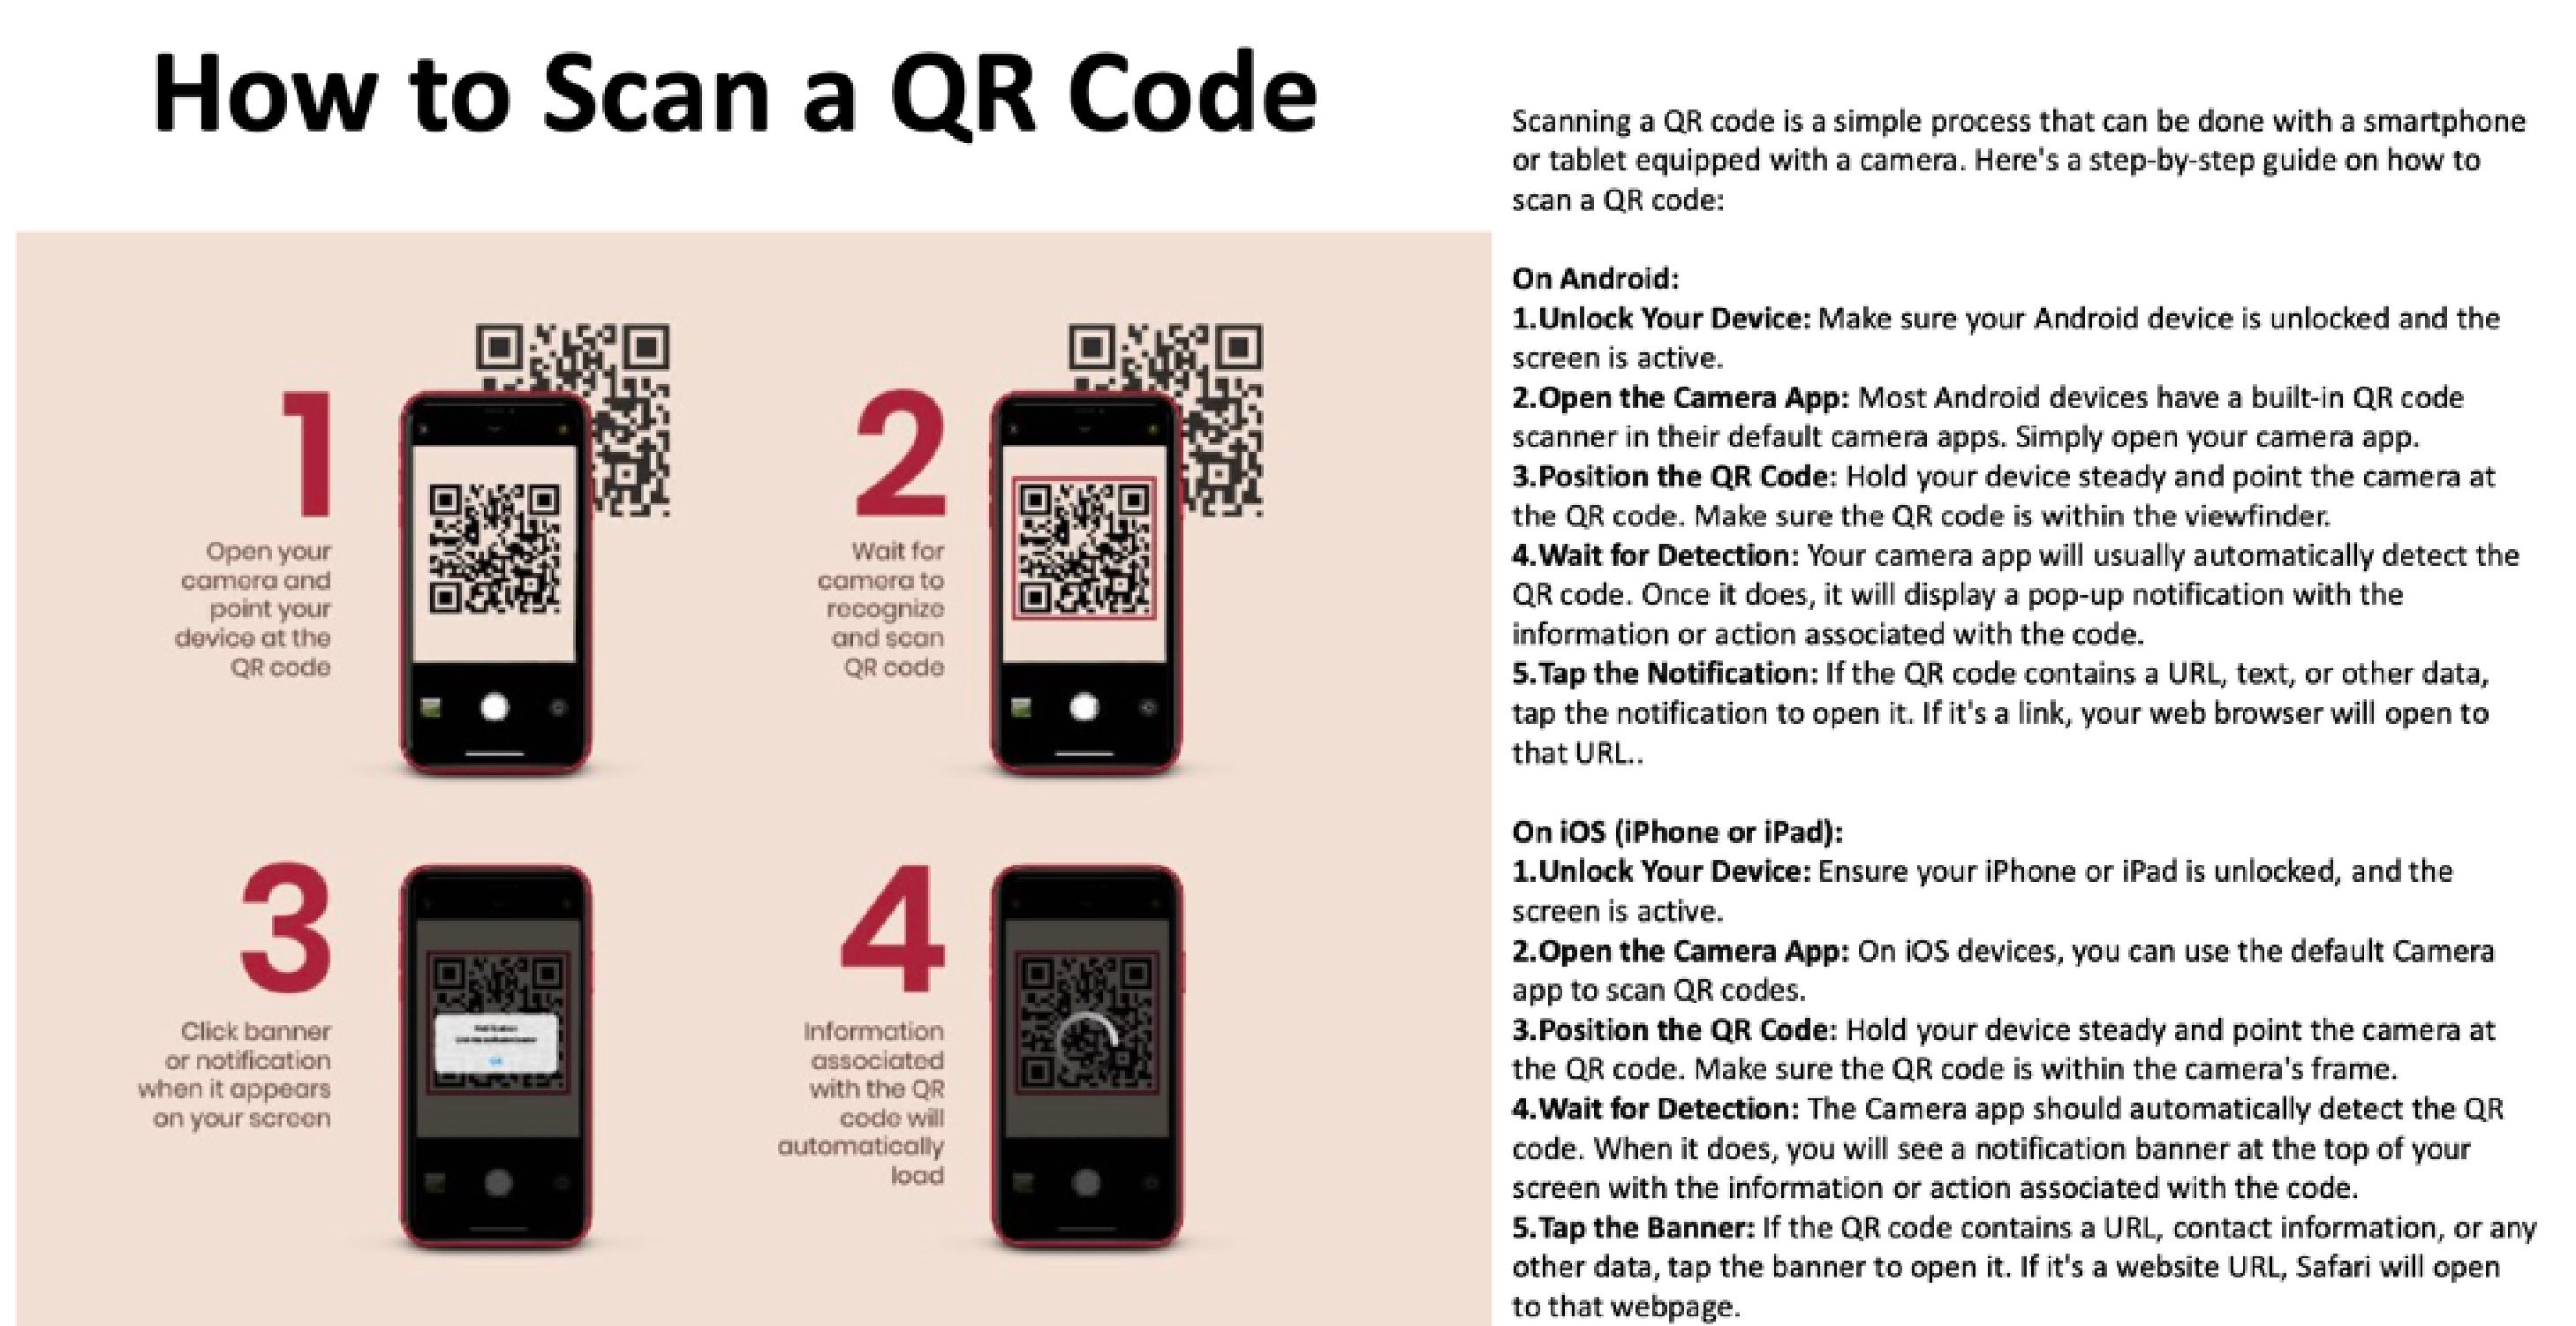 How to Scan a QR Code Image